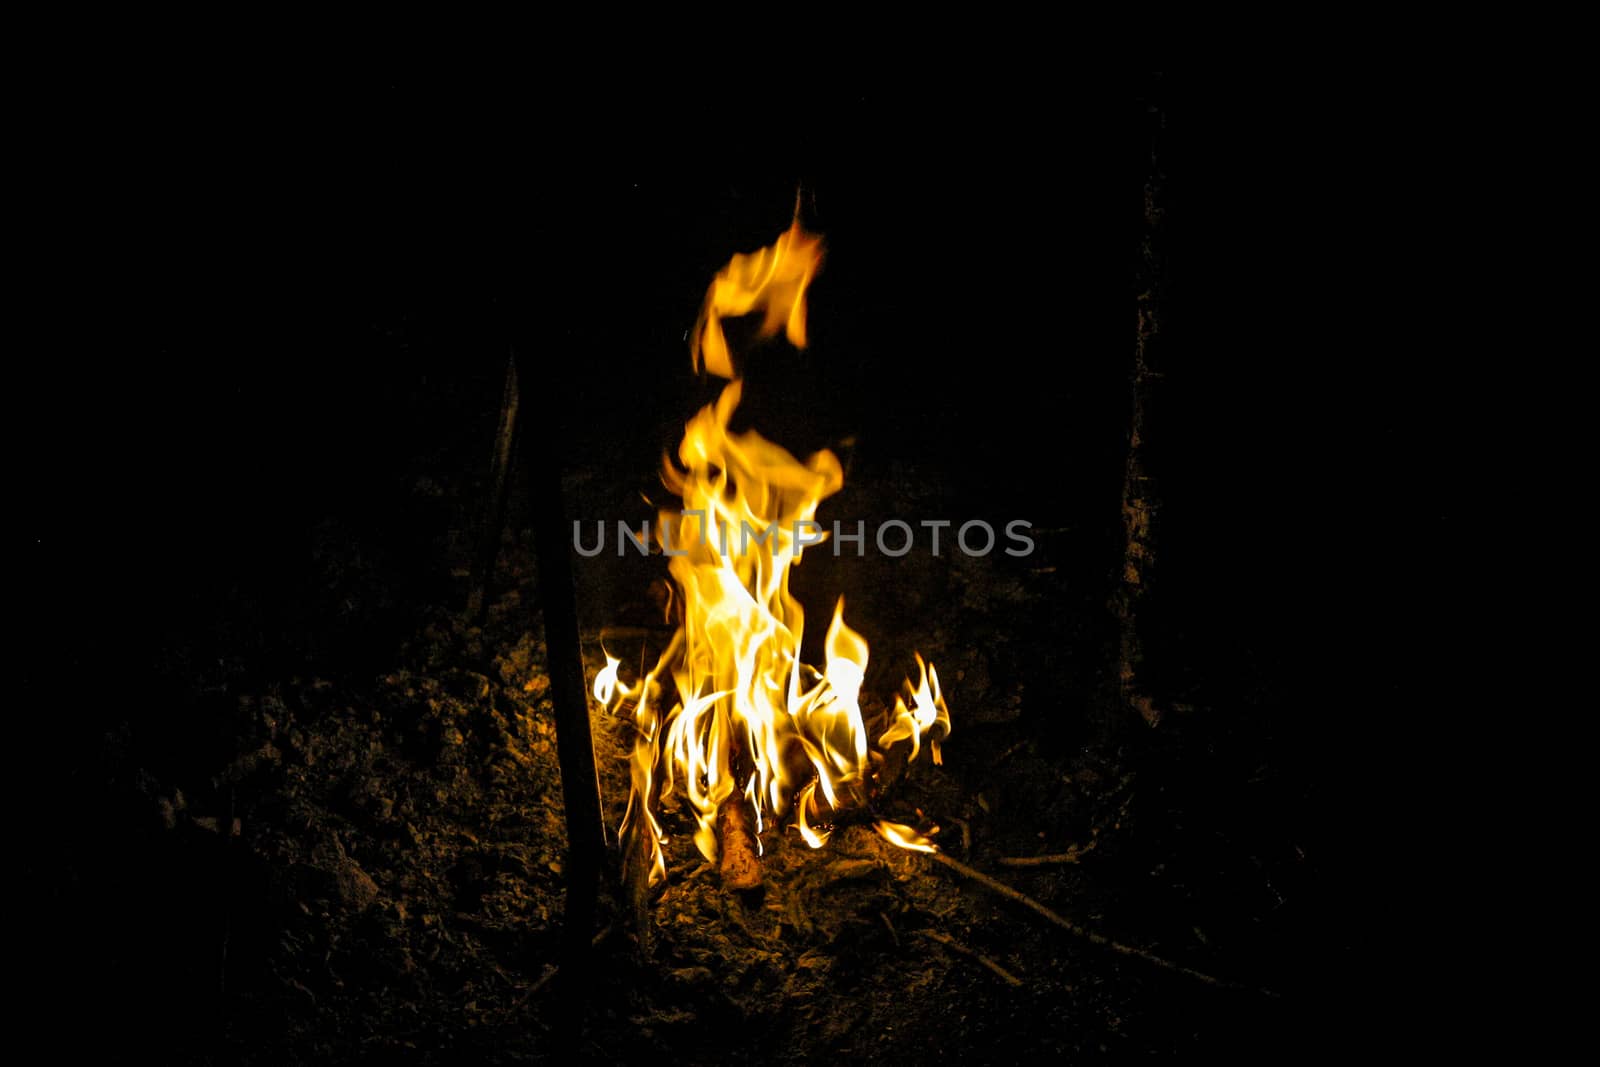 Fire flames in the dark image of a campfire at night isolated on the black background